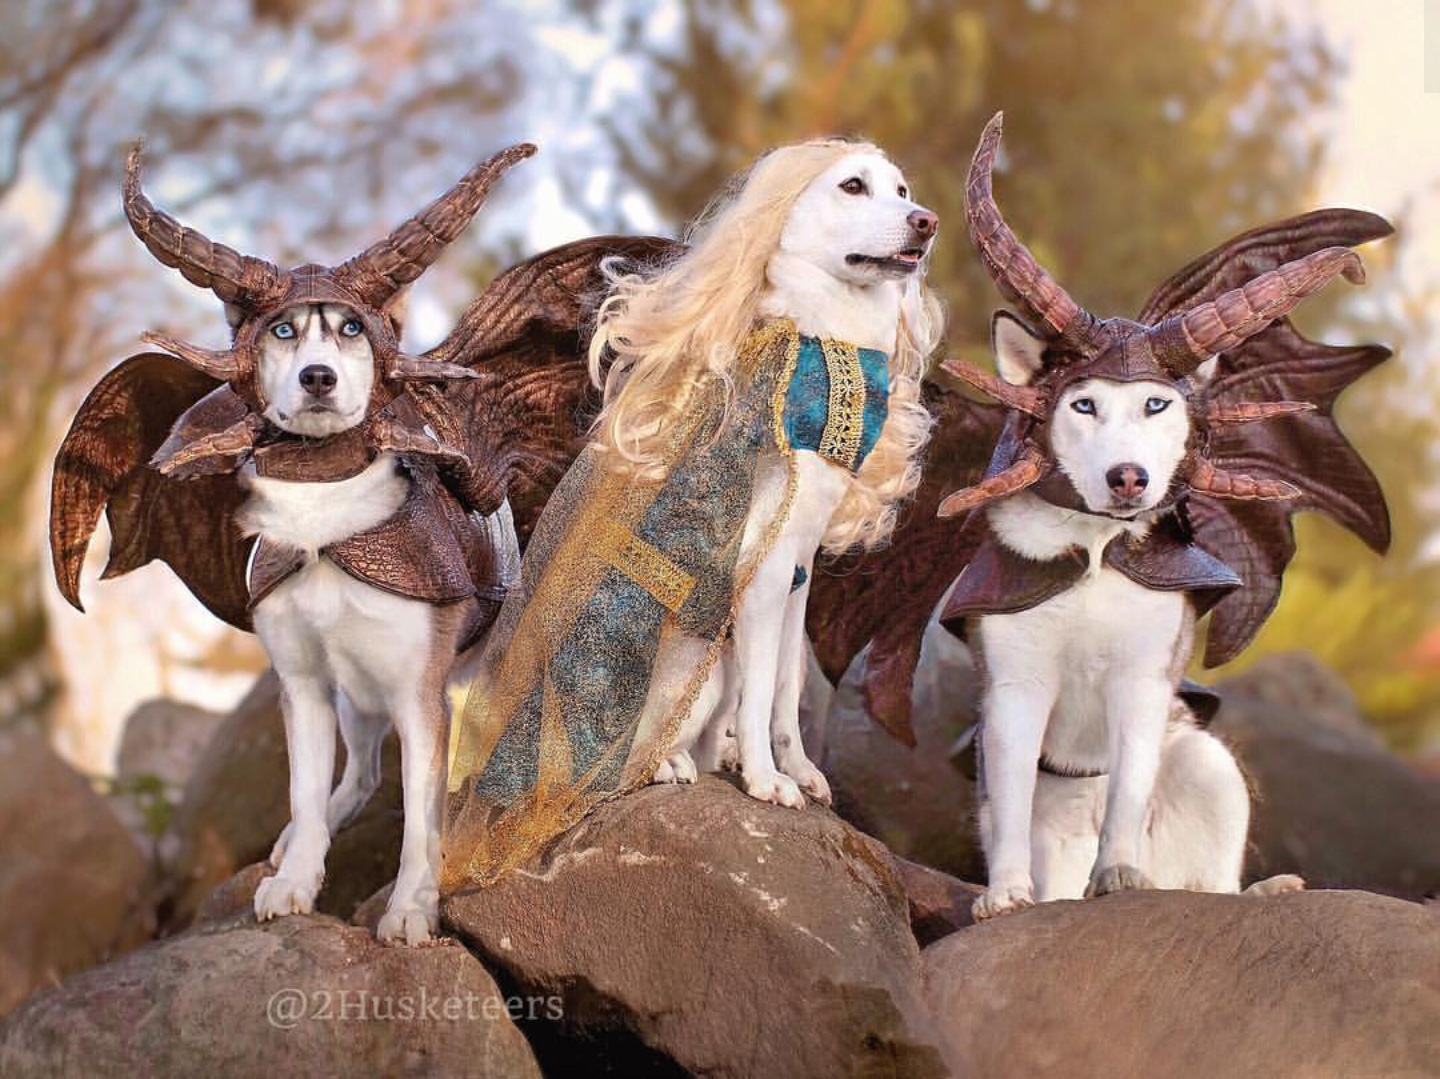 Game of Thrones dogs via 2husketeers